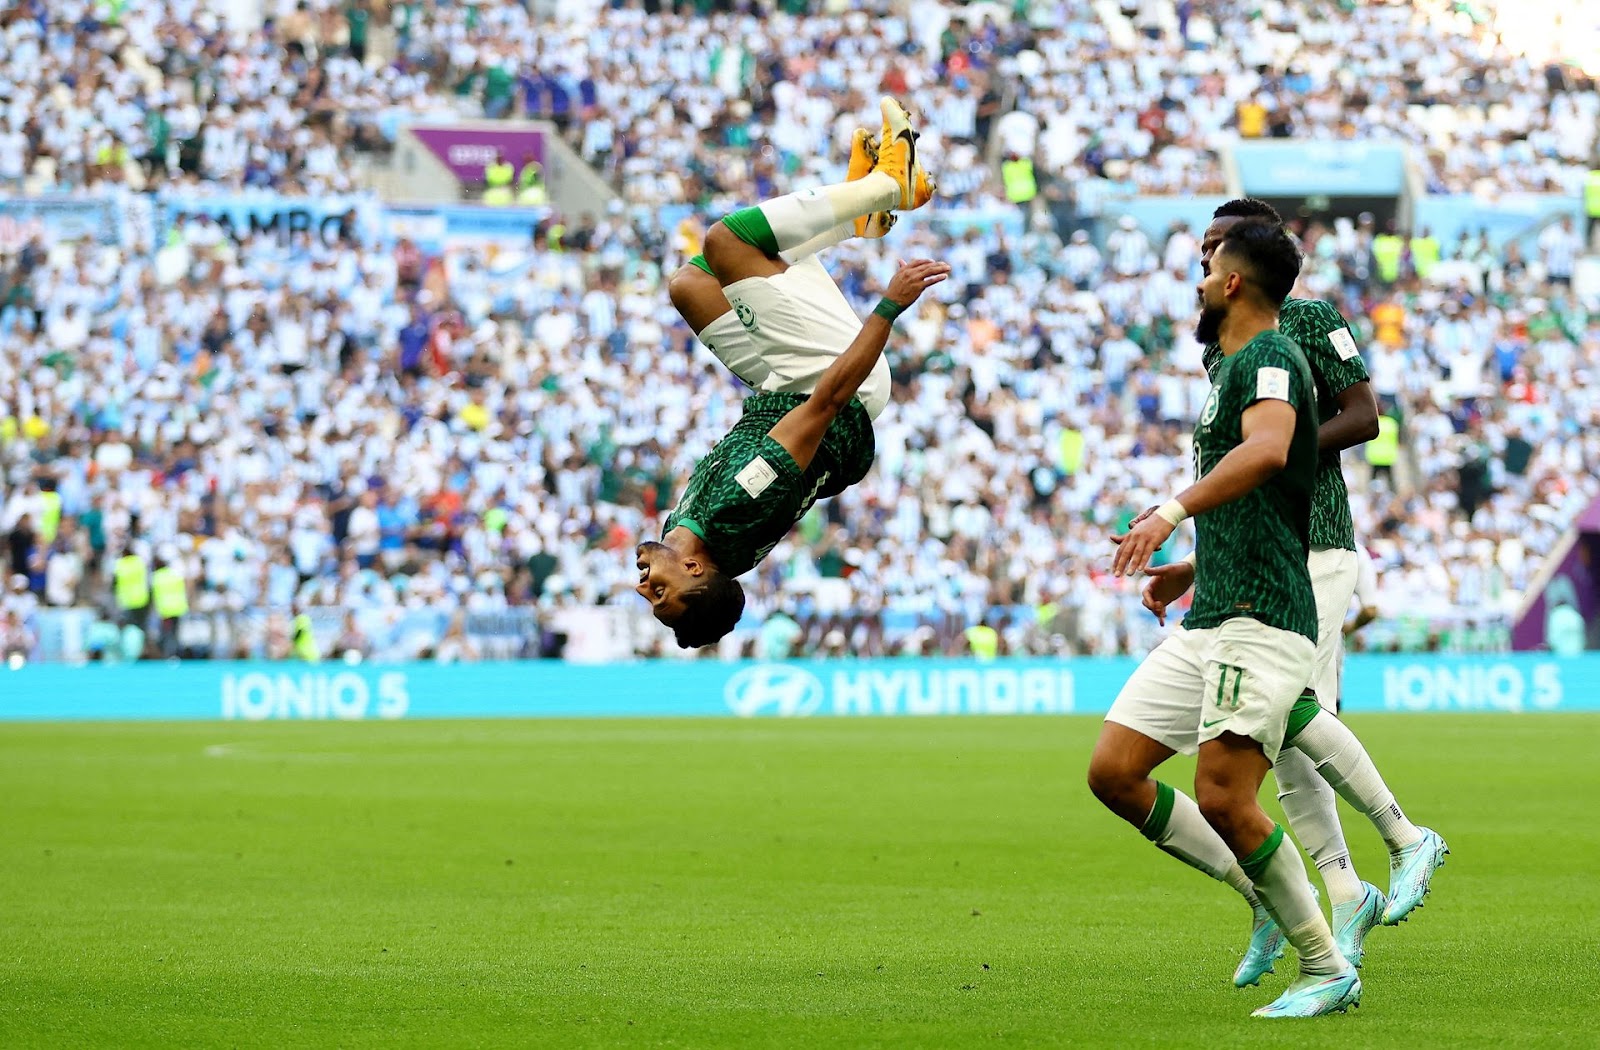 Argentina Shocked as Saudi Arabia Pulls Off the Impossible Upset lost (2-1) - Asiana Times